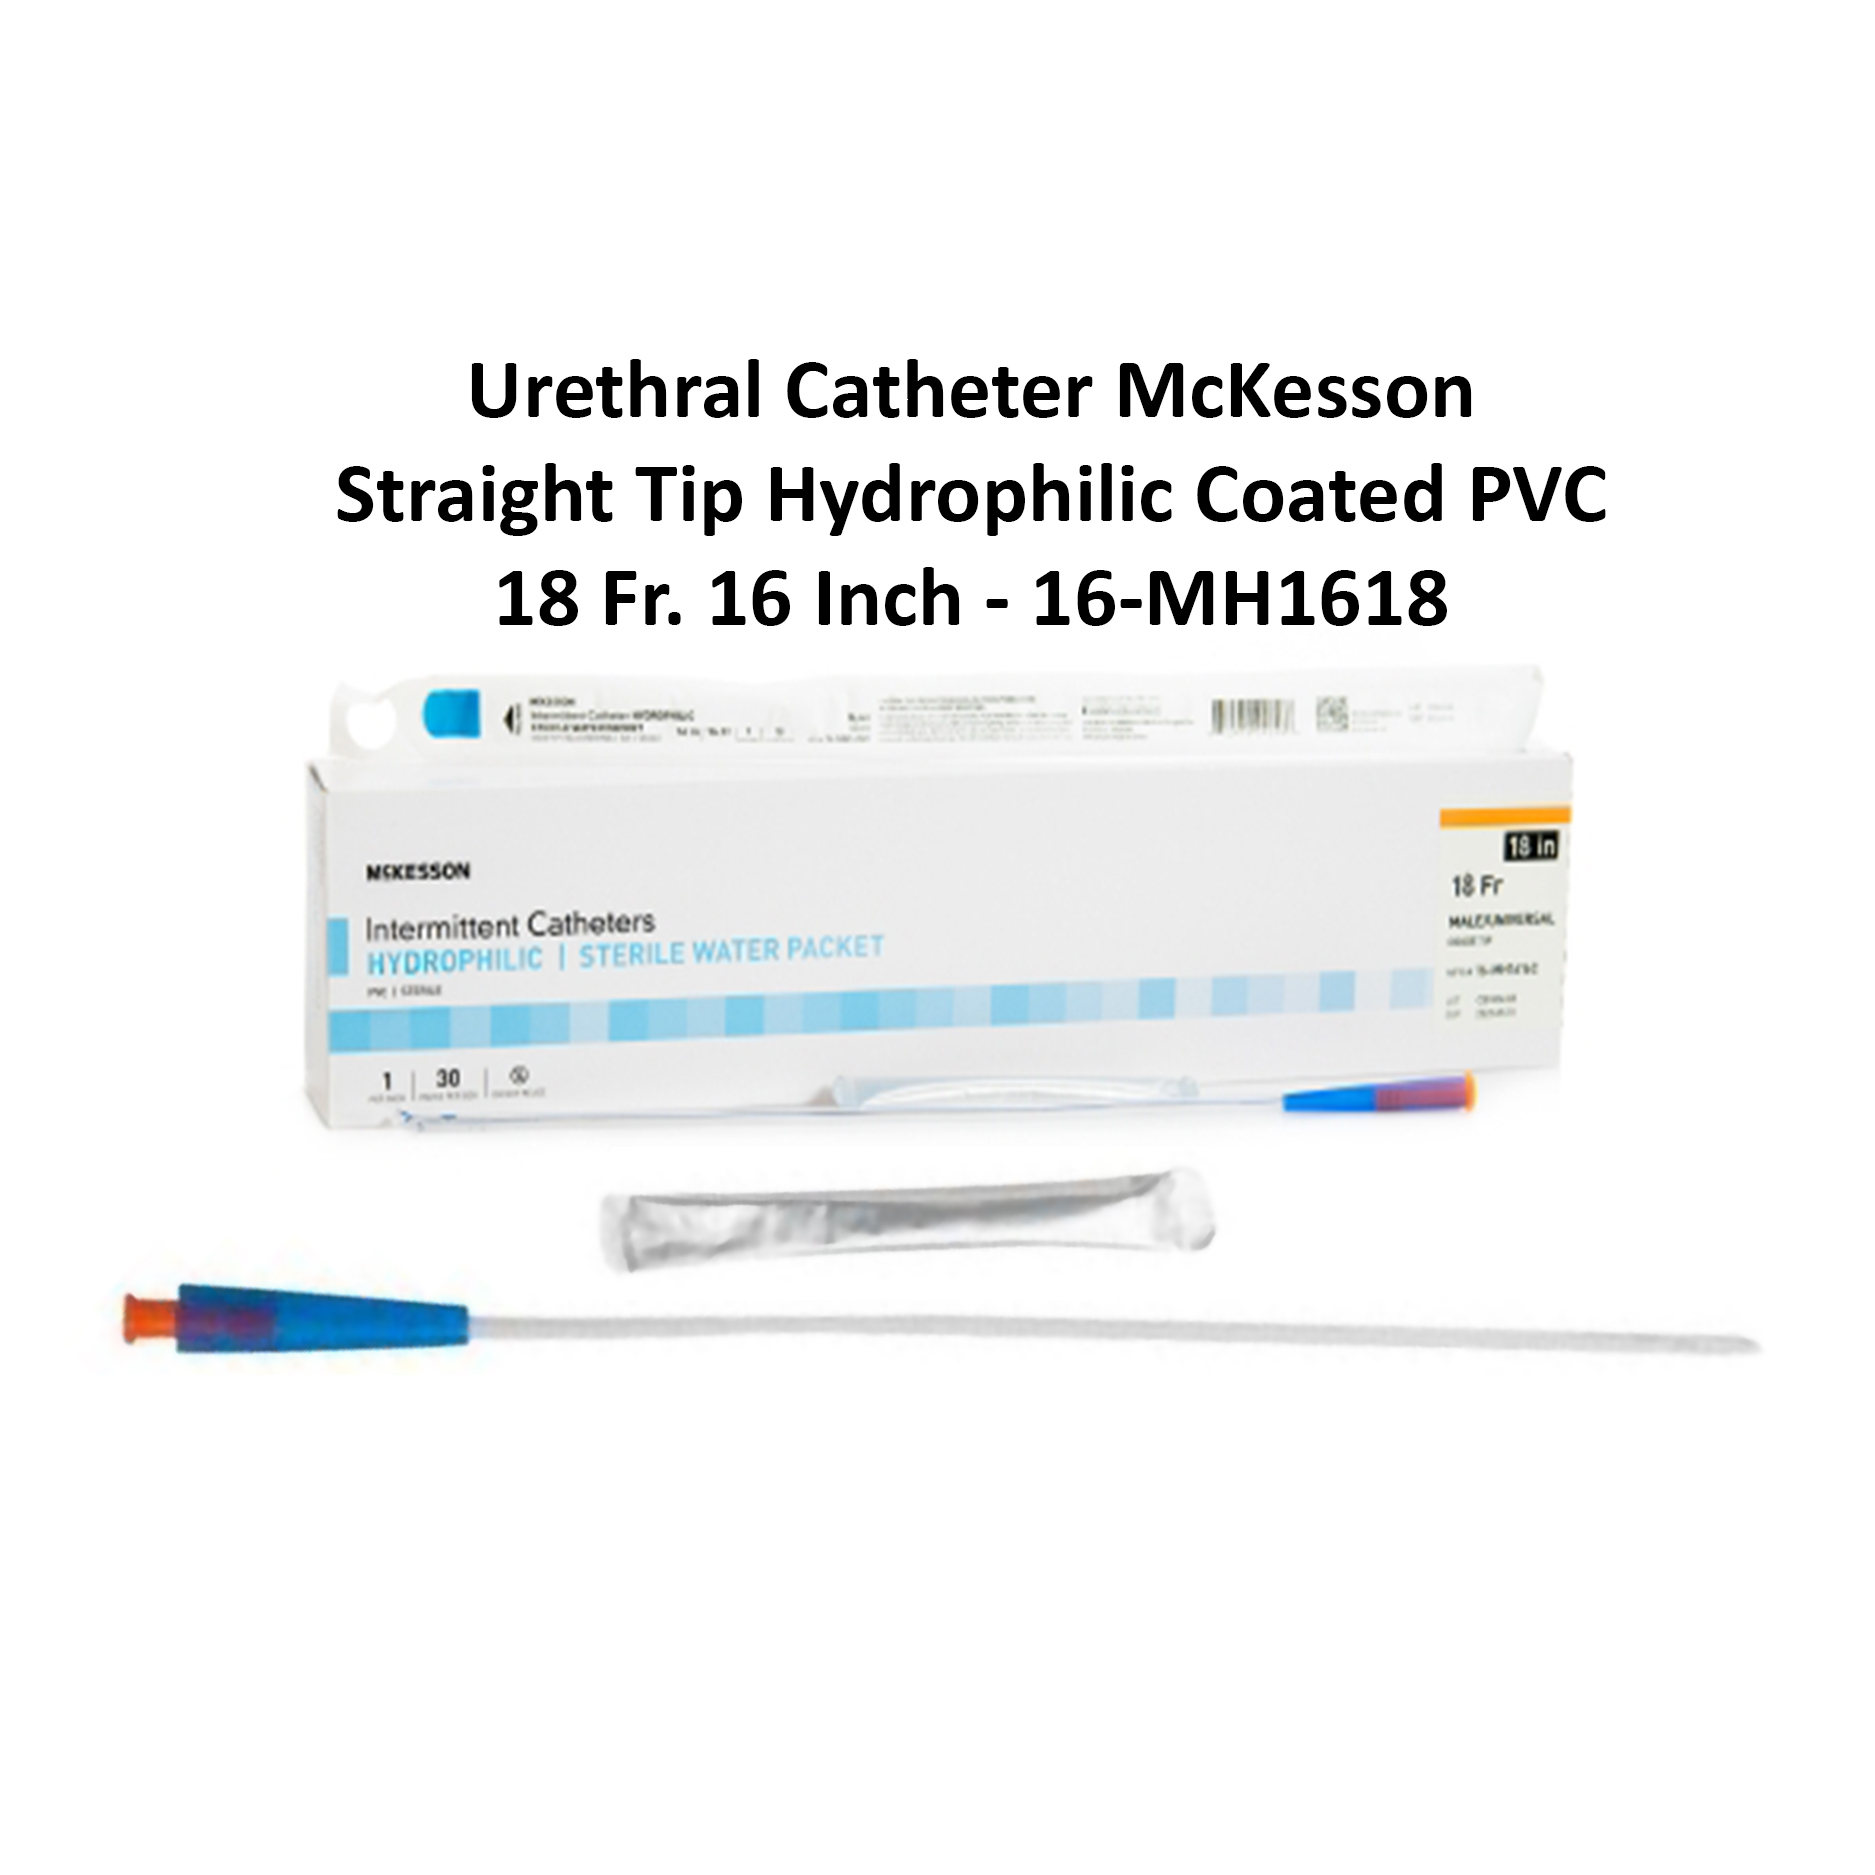 Urethral Catheter McKesson Straight Tip Hydrophilic Coated PVC 18 Fr. 16 Inch - 16-MH1618